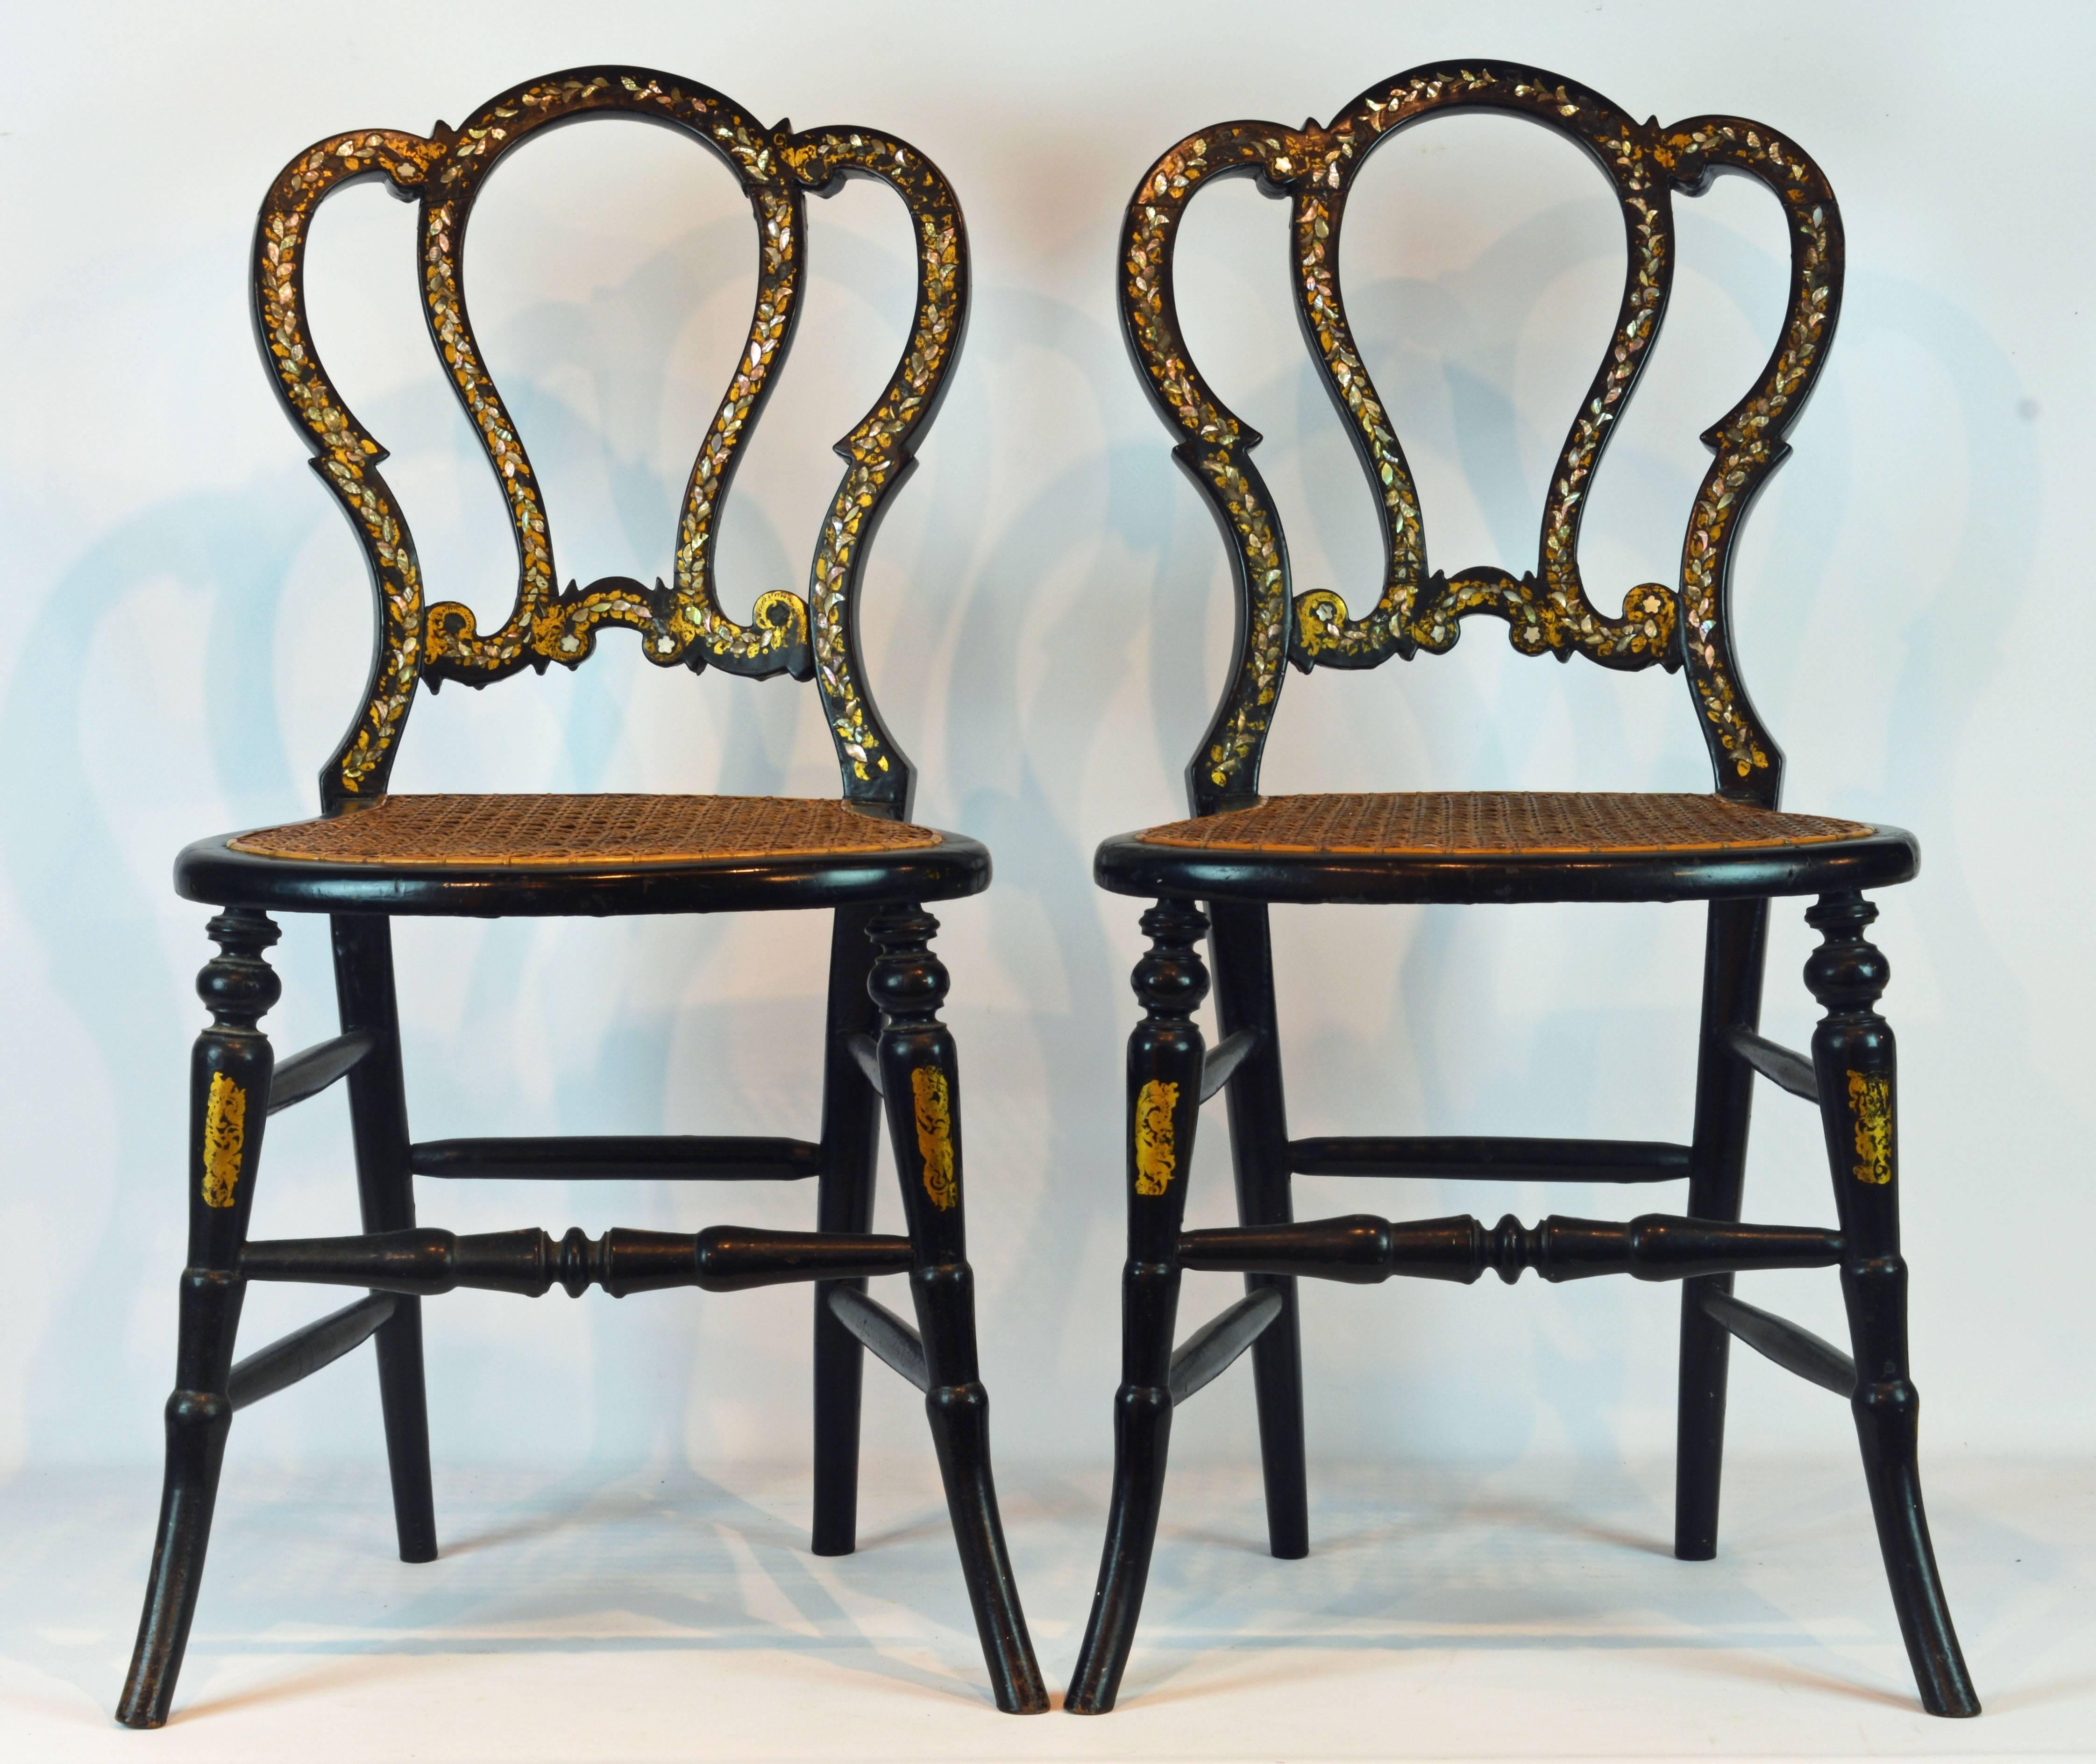 These chairs feature an elegant and romantic design made of carved wood, adorned by gilt vignettes and inlaid with mother-of-pearl. The caned seats are in good condition. The date to the 1880s England.